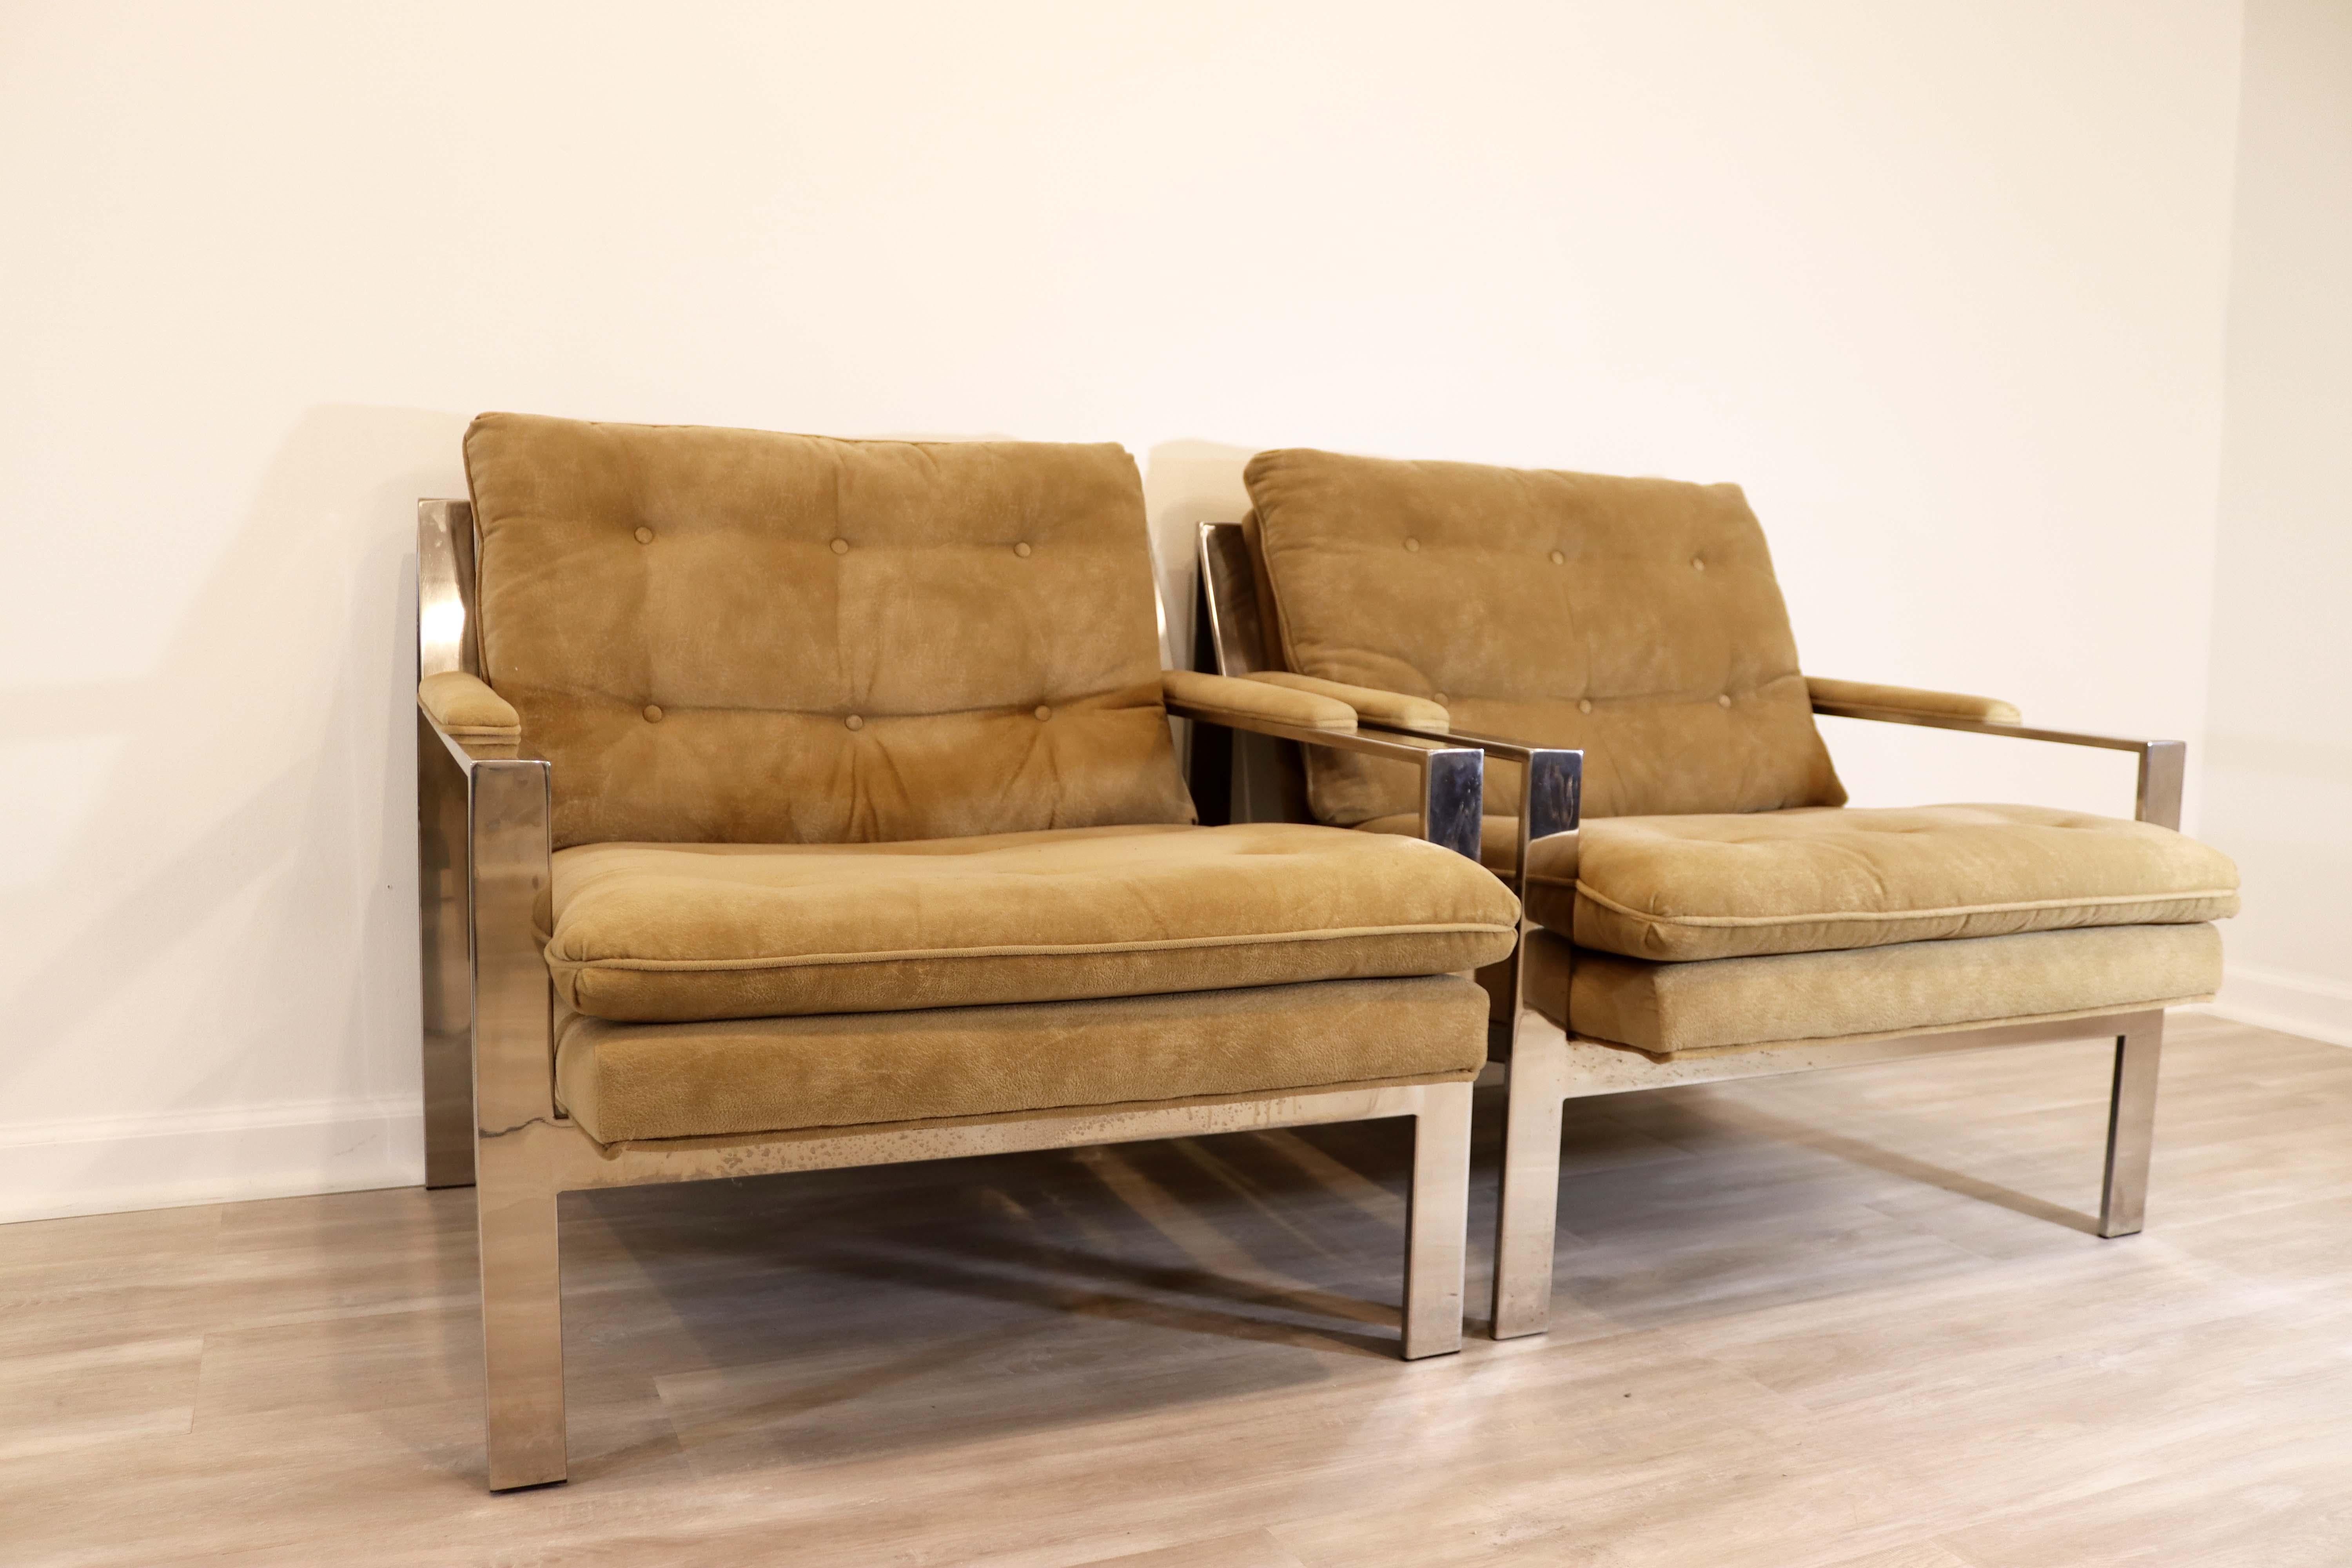 A classic, modernist design by Cy Mann from the 1970s and in the Milo Baughman style. This chair features a sculptural, heavy chrome plated flat bar frame, with soft upholstered seating area and armrests and button tufting detail. Fabric is original